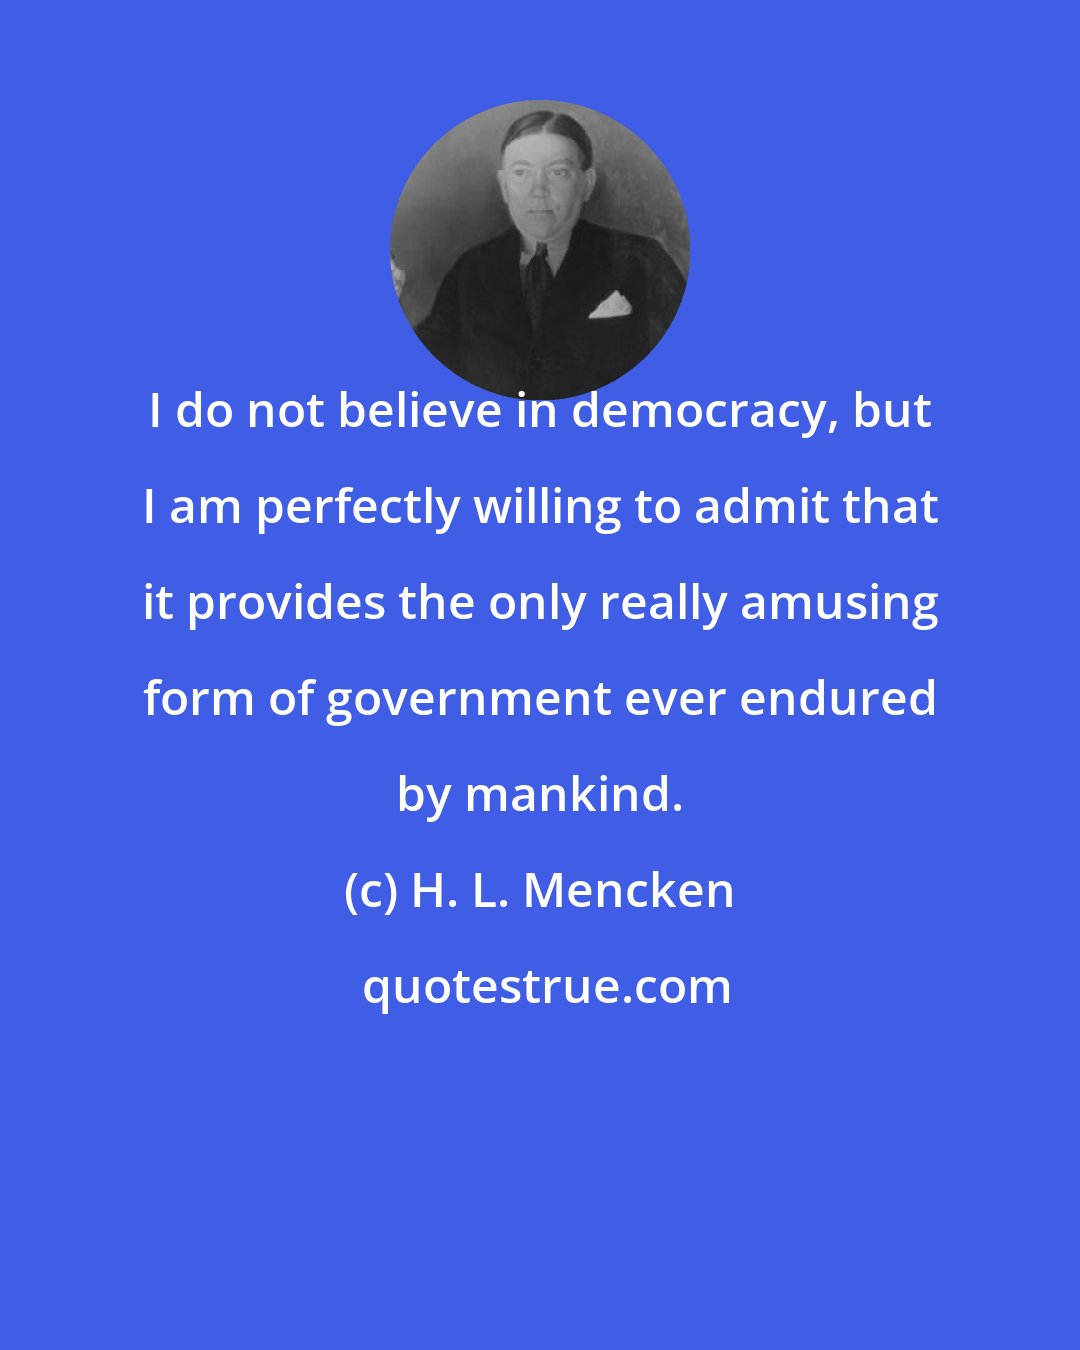 H. L. Mencken: I do not believe in democracy, but I am perfectly willing to admit that it provides the only really amusing form of government ever endured by mankind.